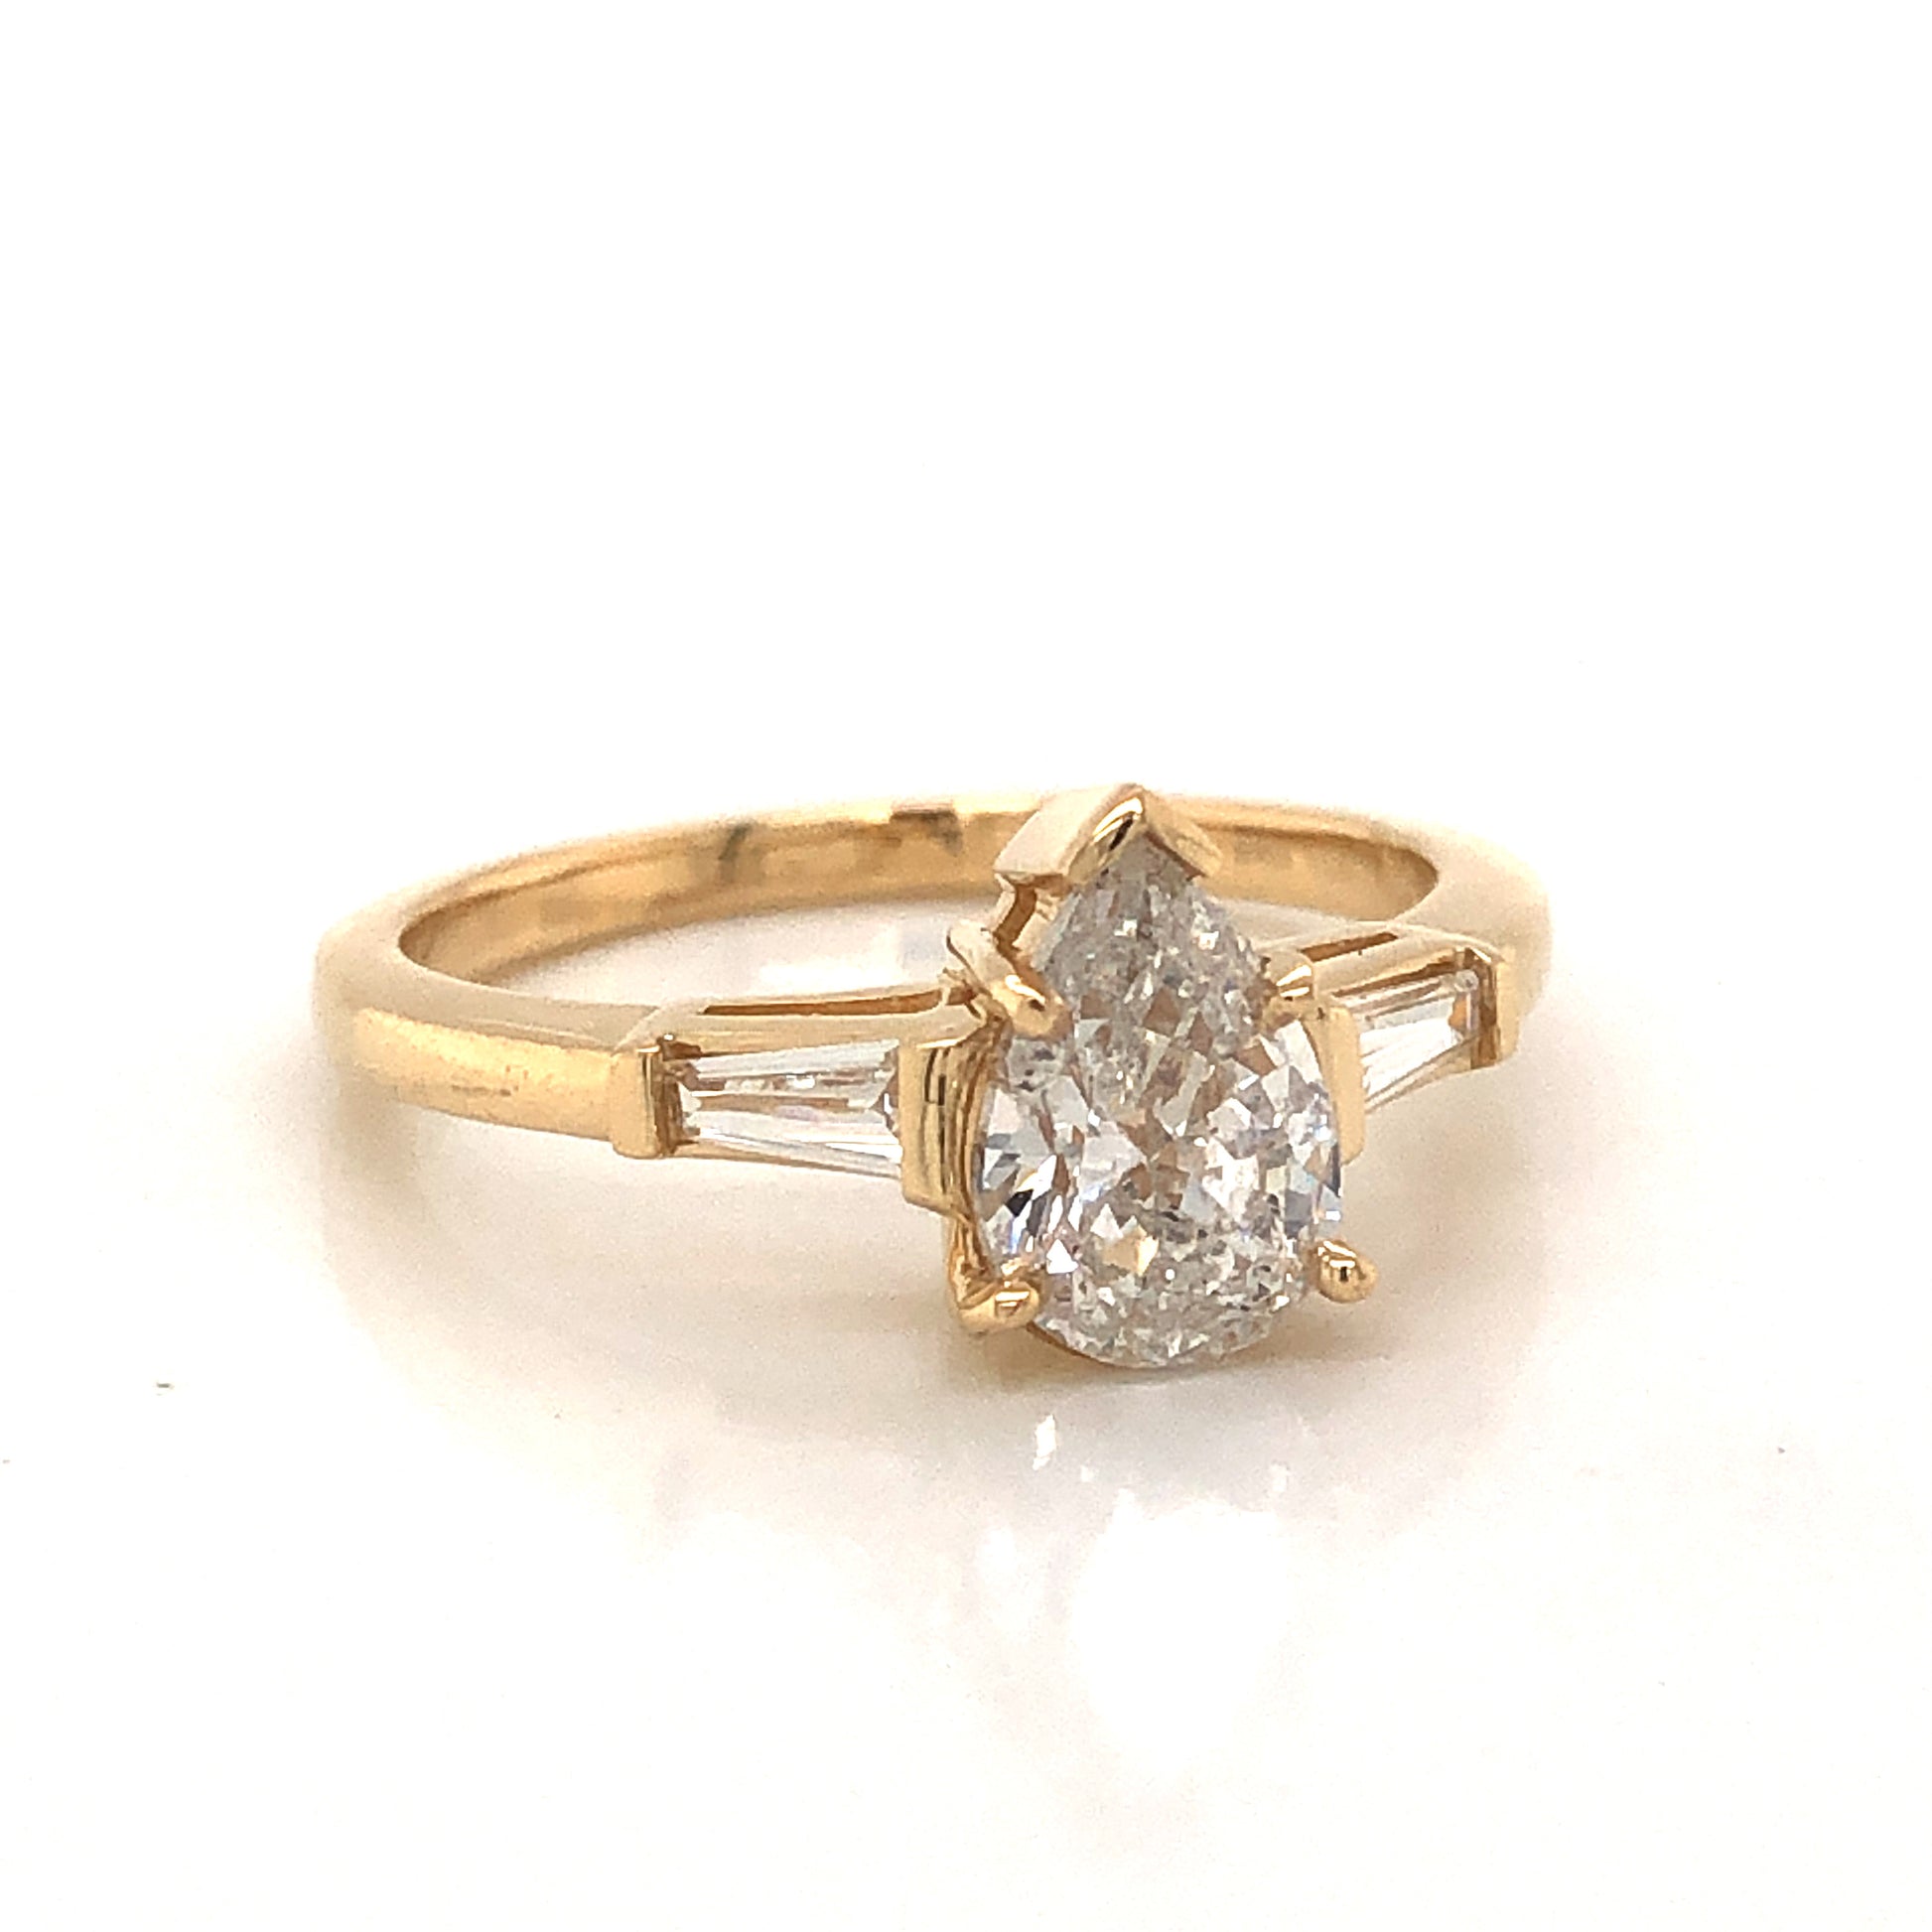 1.01 Pear Cut Diamond Engagement Ring in 14k Yellow GoldComposition: 14 Karat Yellow GoldRing Size: 6.5Total Diamond Weight: 1.23 ctTotal Gram Weight: 3.1 gInscription: 14k 